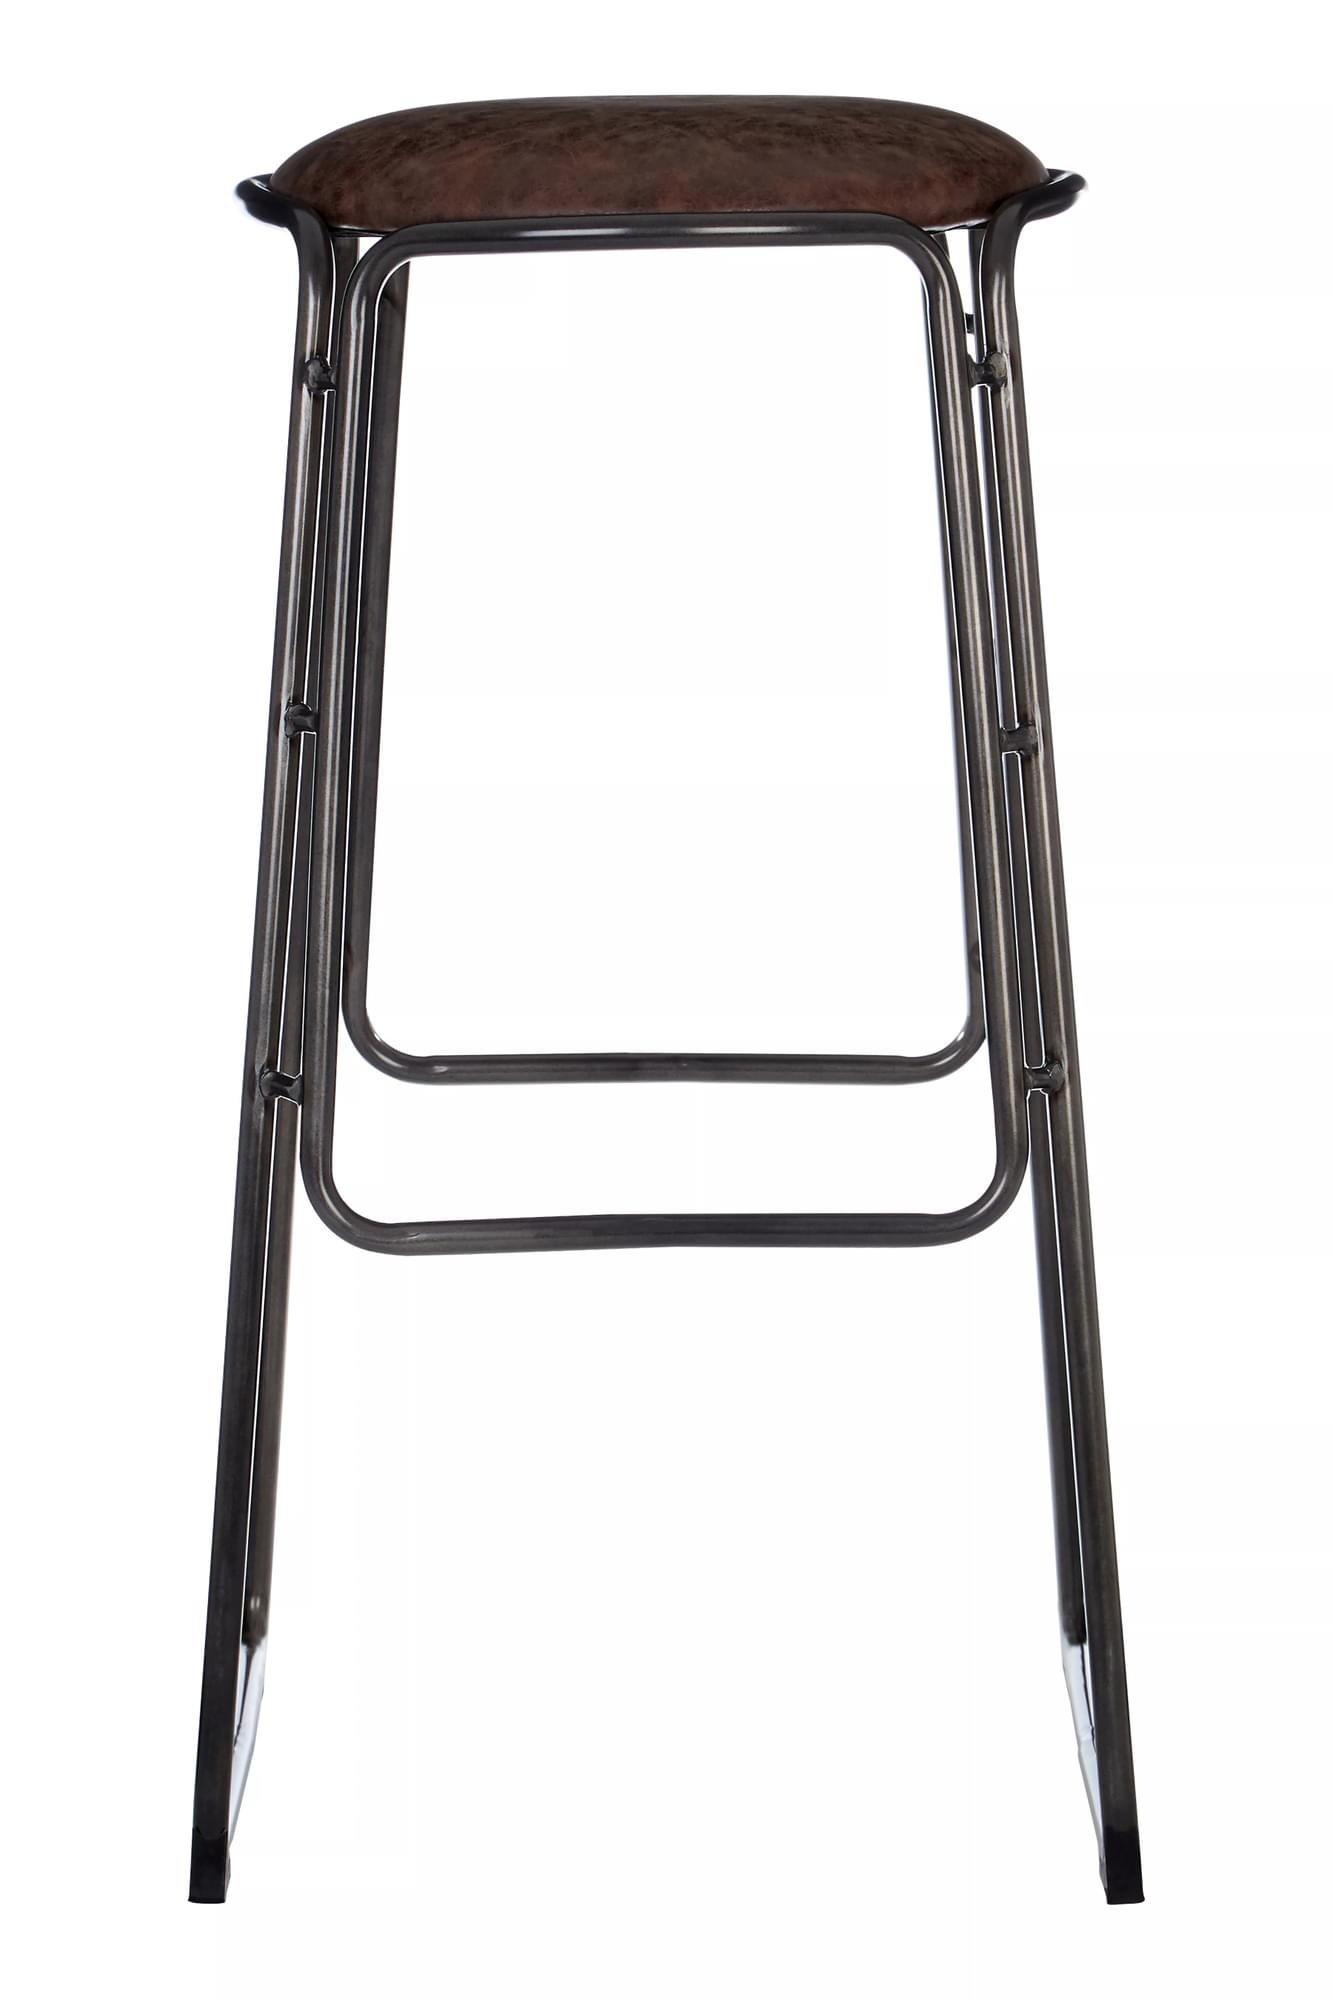 Interiors by Premier Dalston Bar Stool with Gunmetal legs